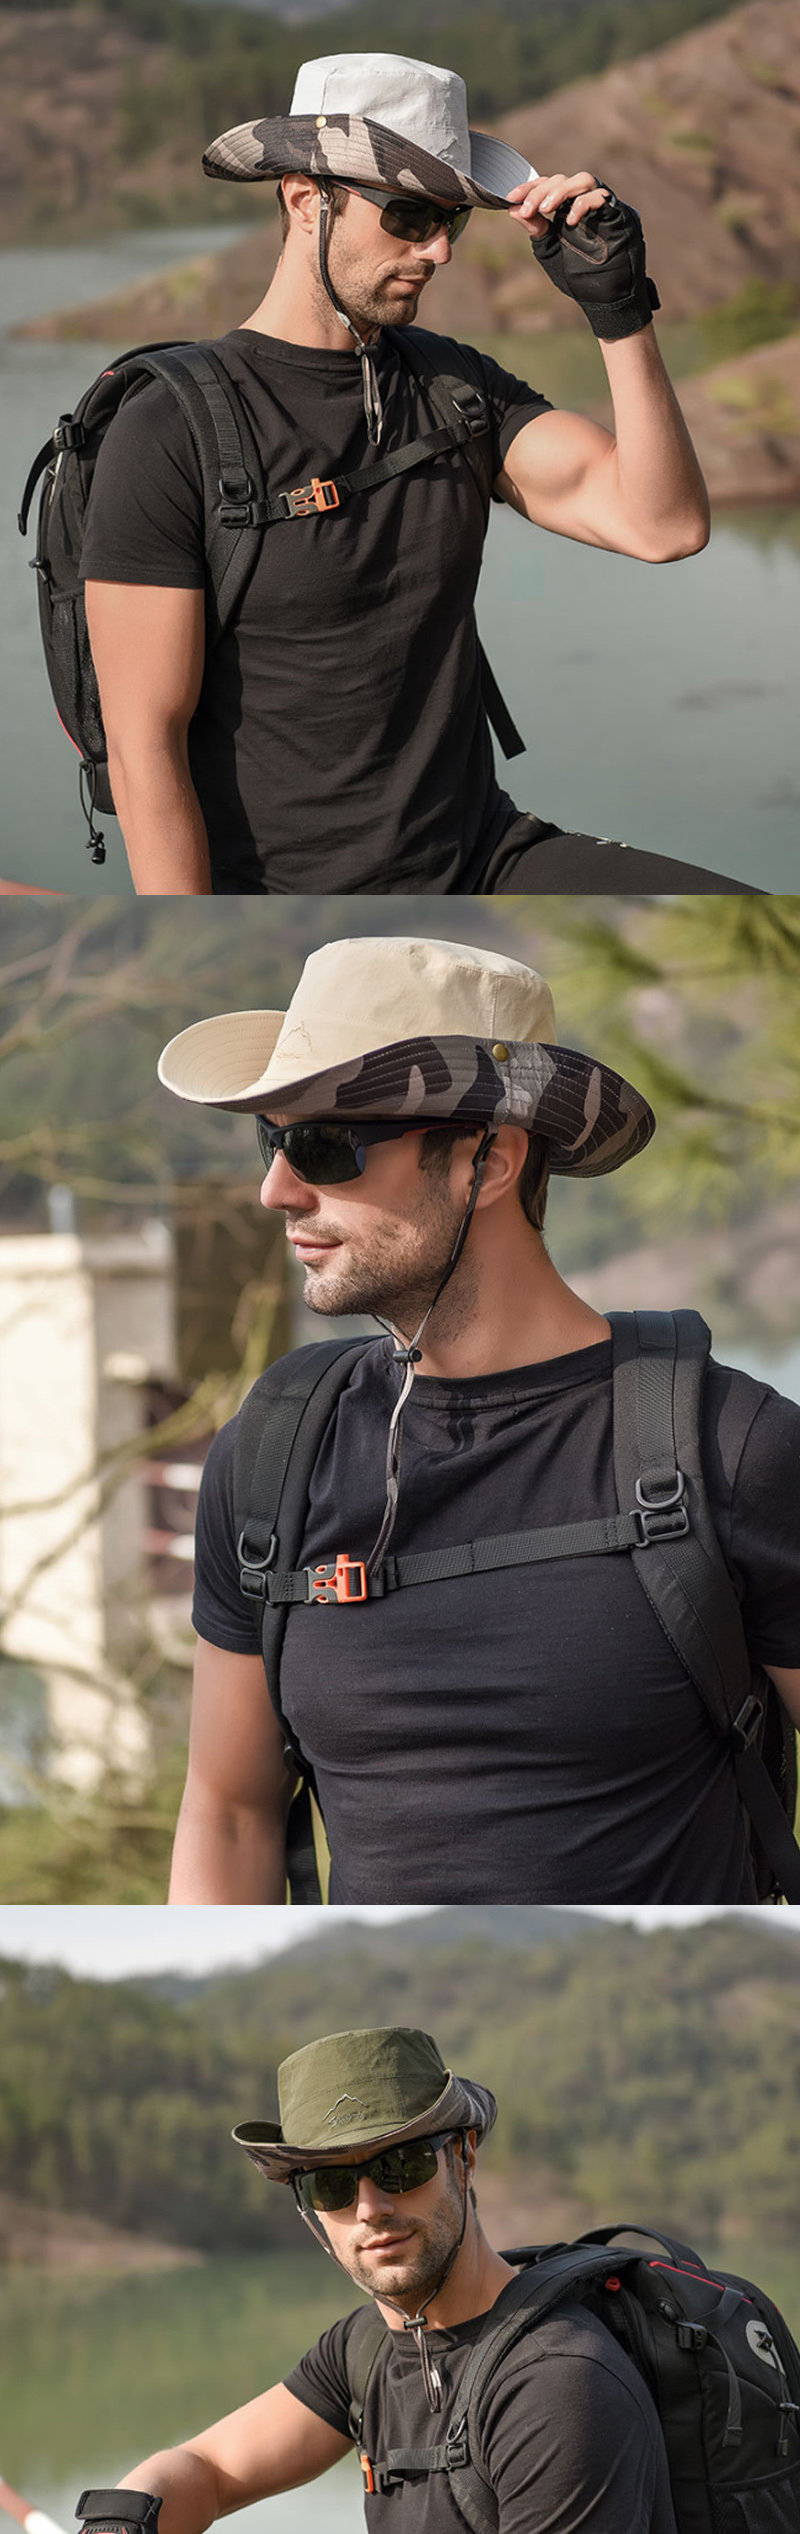 Tactical-Cap-Outdoor-Bucket-Hat-Folding-Portable-Hiking-Climbing-Sun-Protection-Floppy-Hat-1514812-2